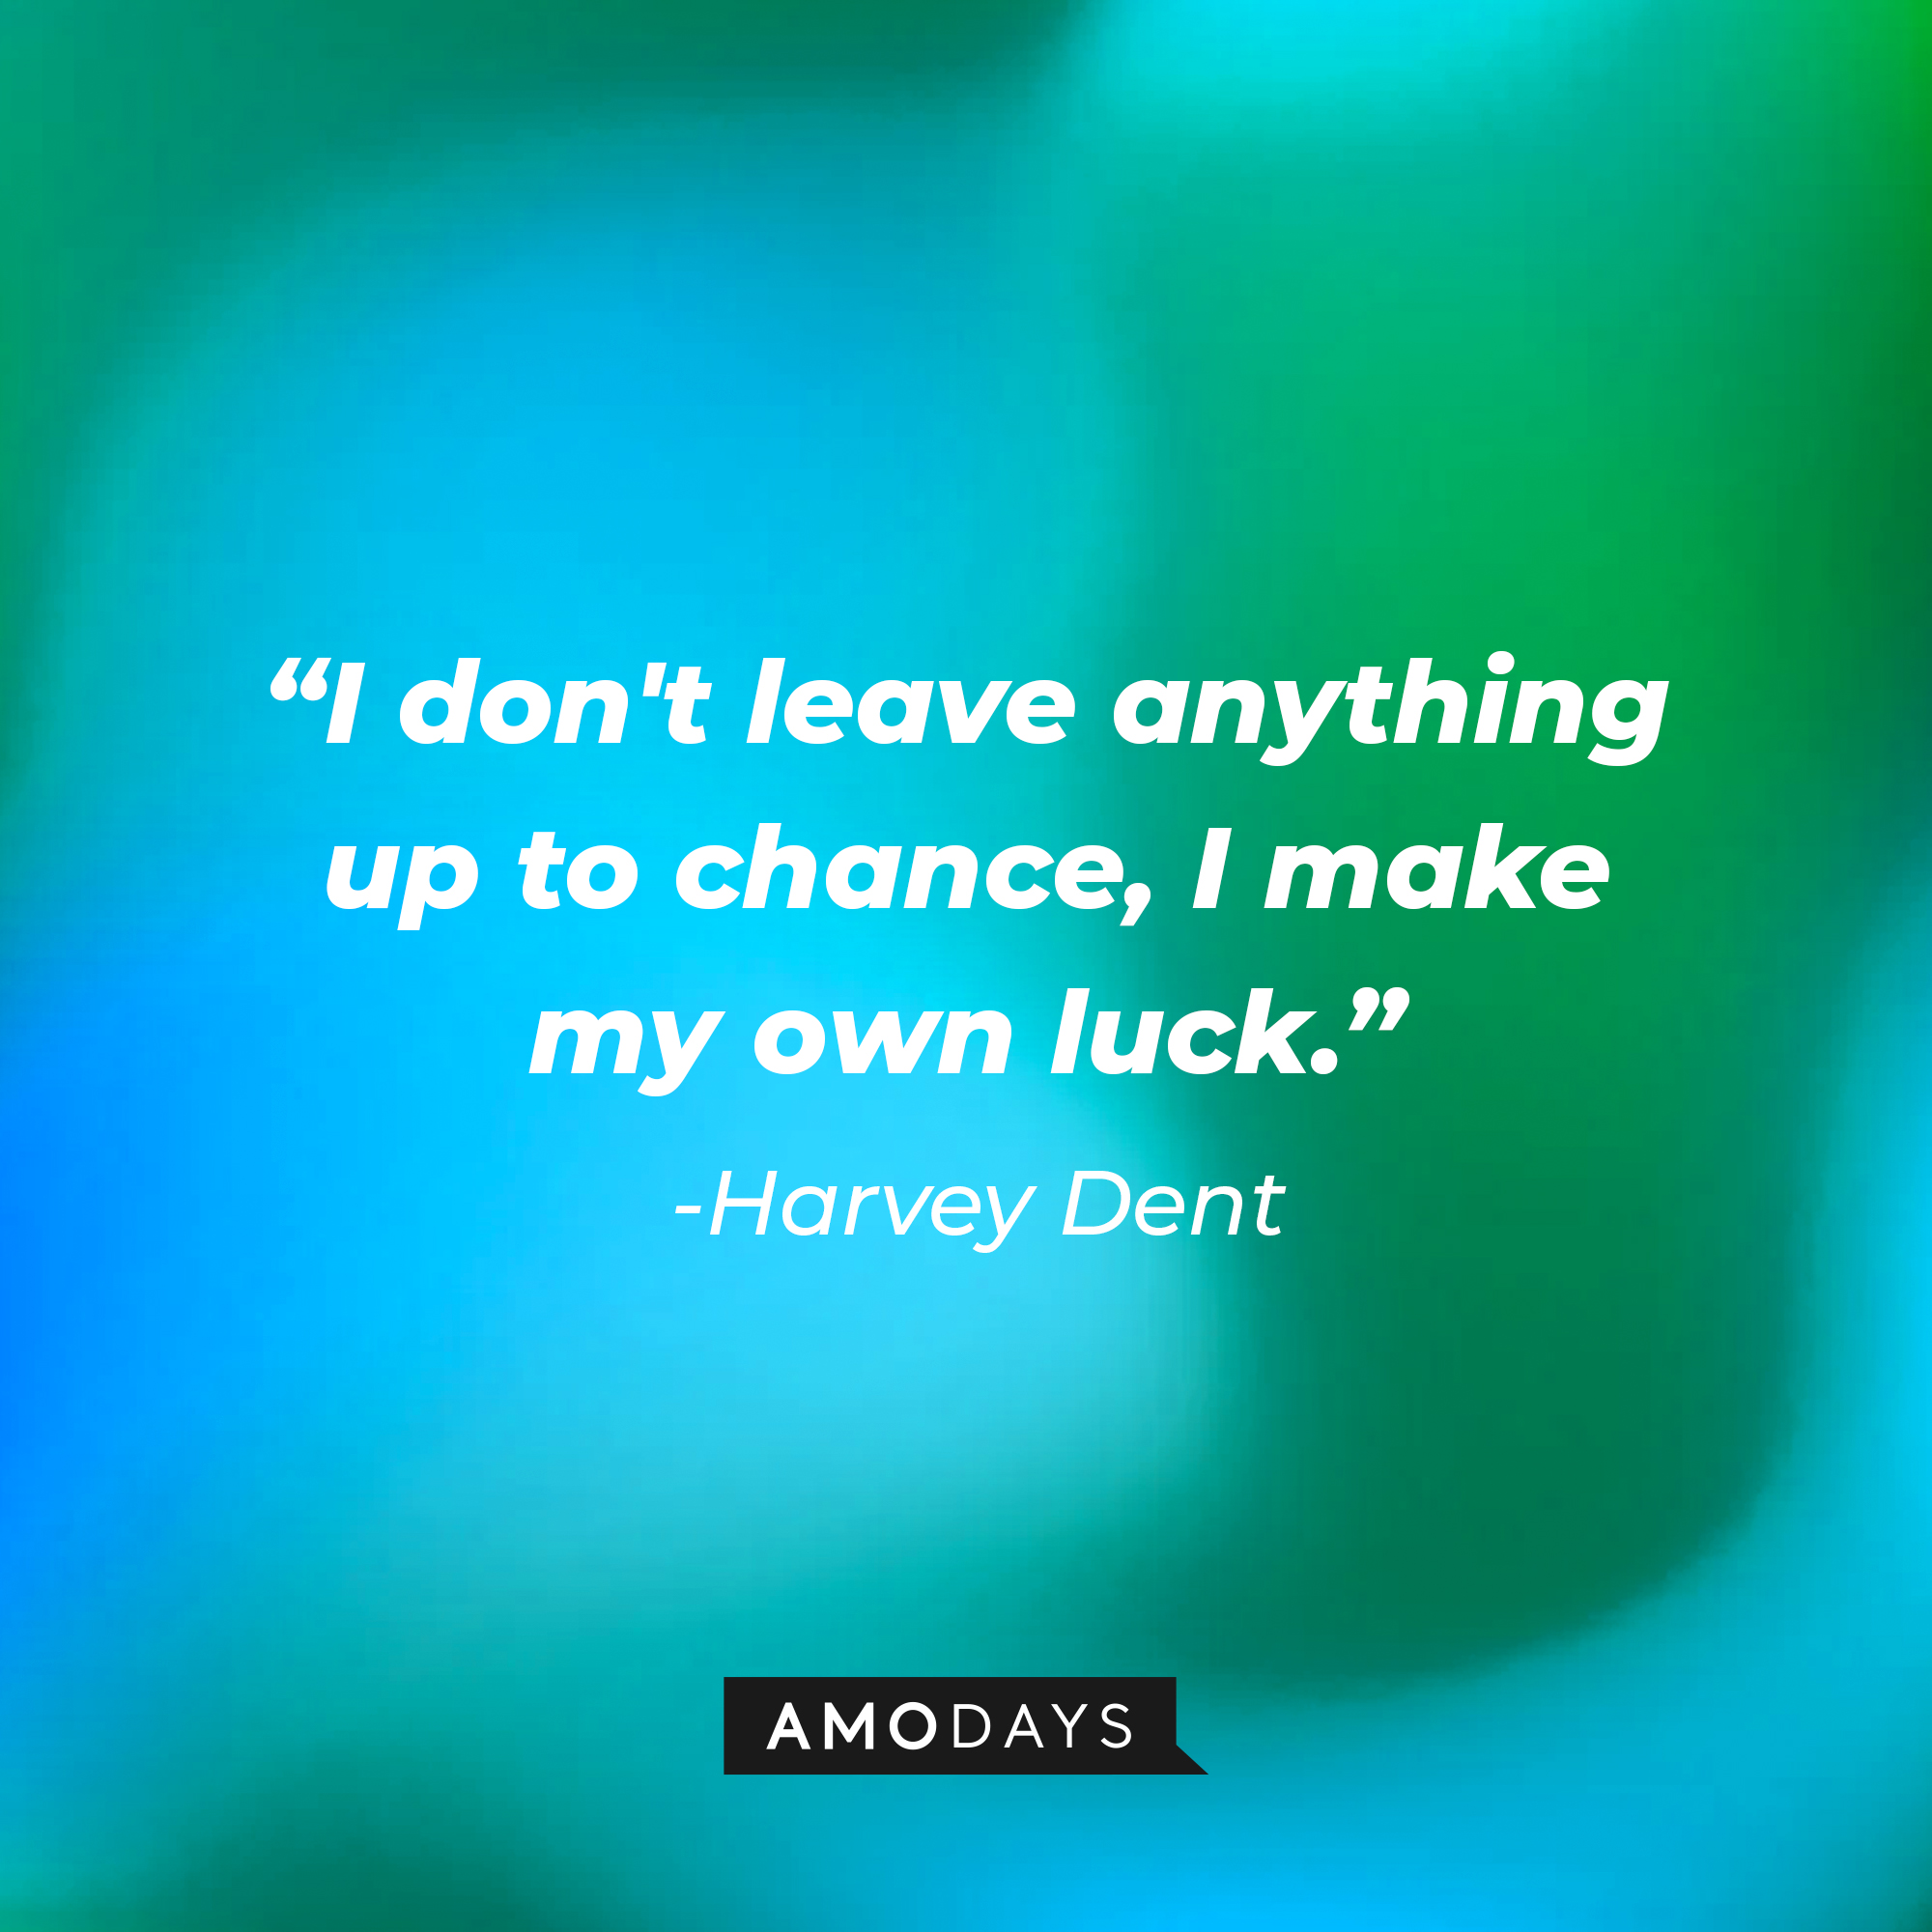 Harvey Dent's quote: “I don't leave anything up to chance, I make my own luck.” | Source: facebook.com/darkknighttrilogy